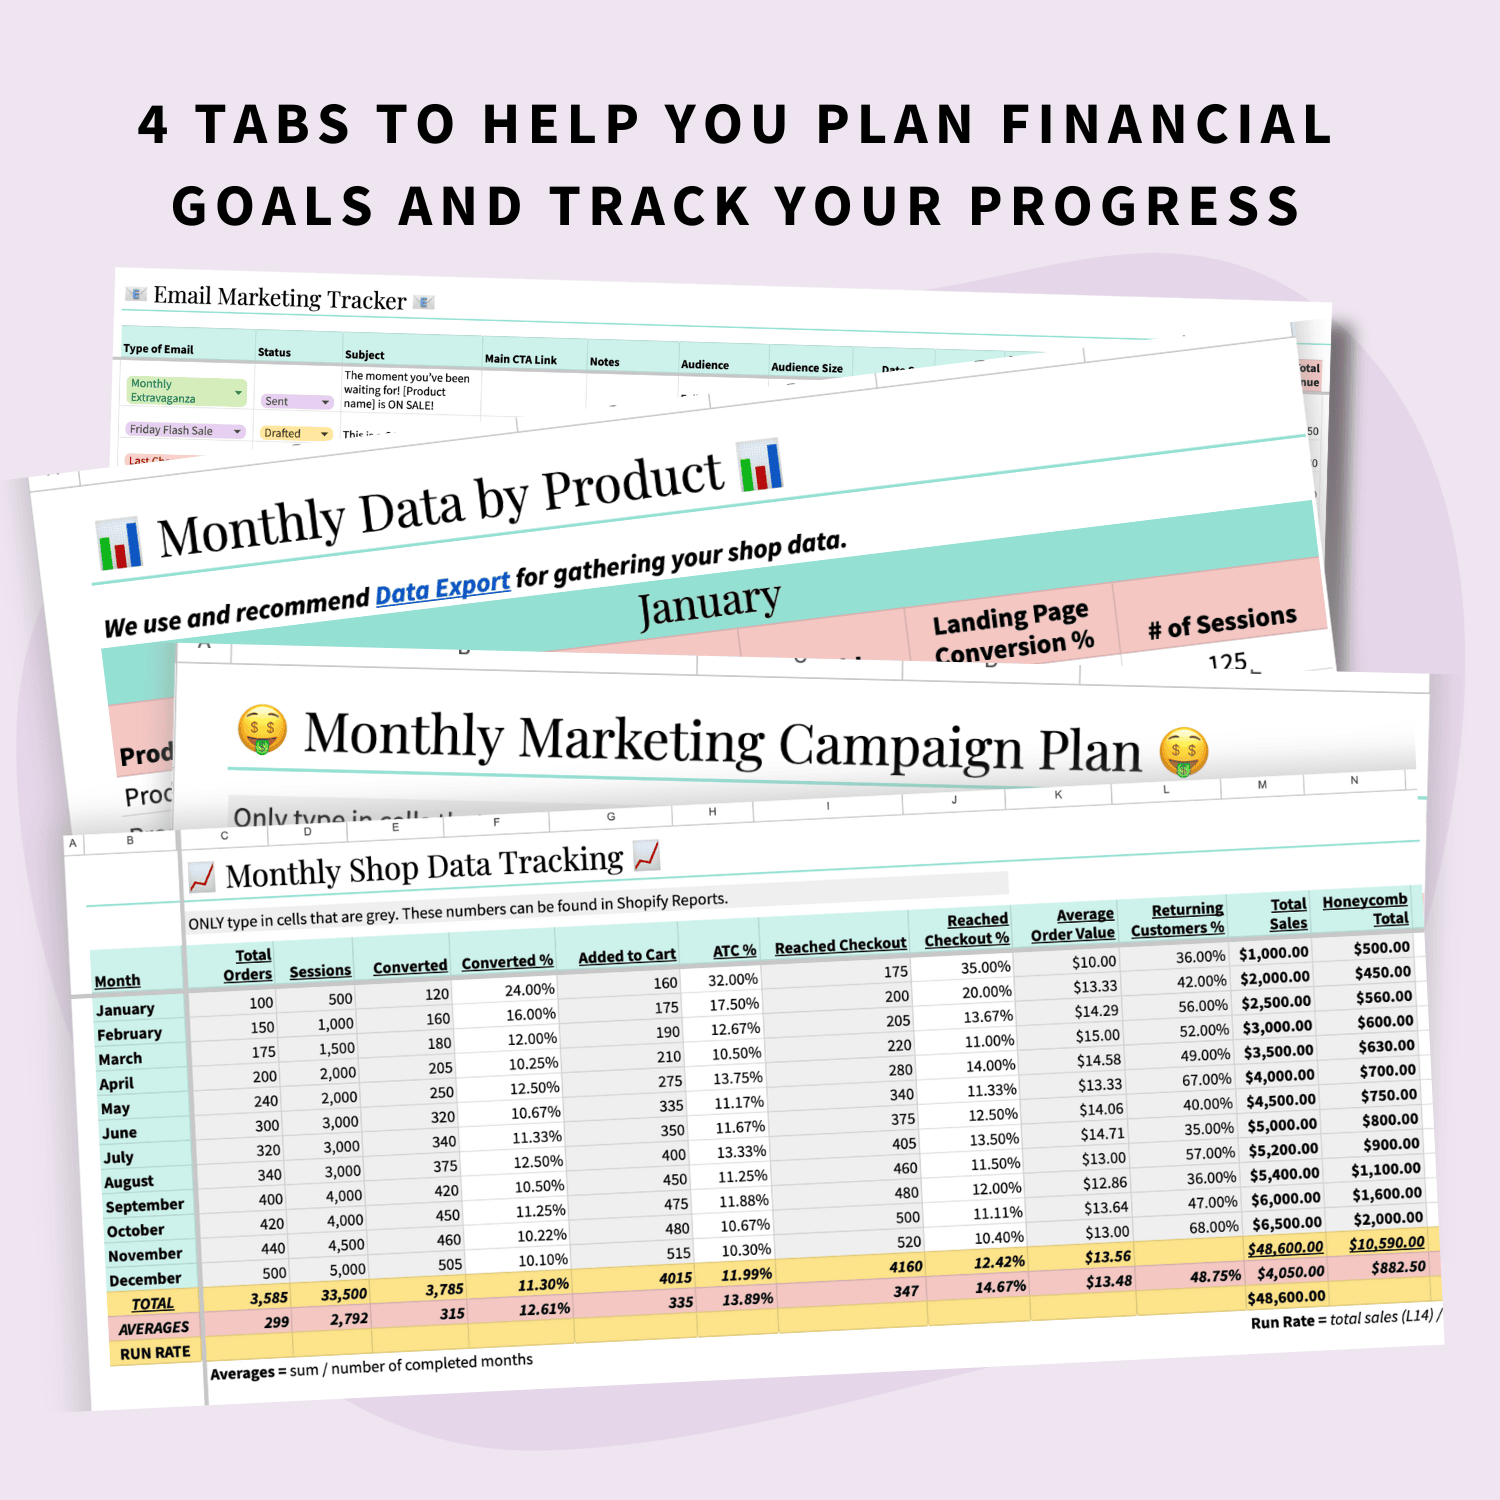 mockup of the 4 tabs for planning your shop goals and tracking progress on the ultimate digital product e-commerce shop planner